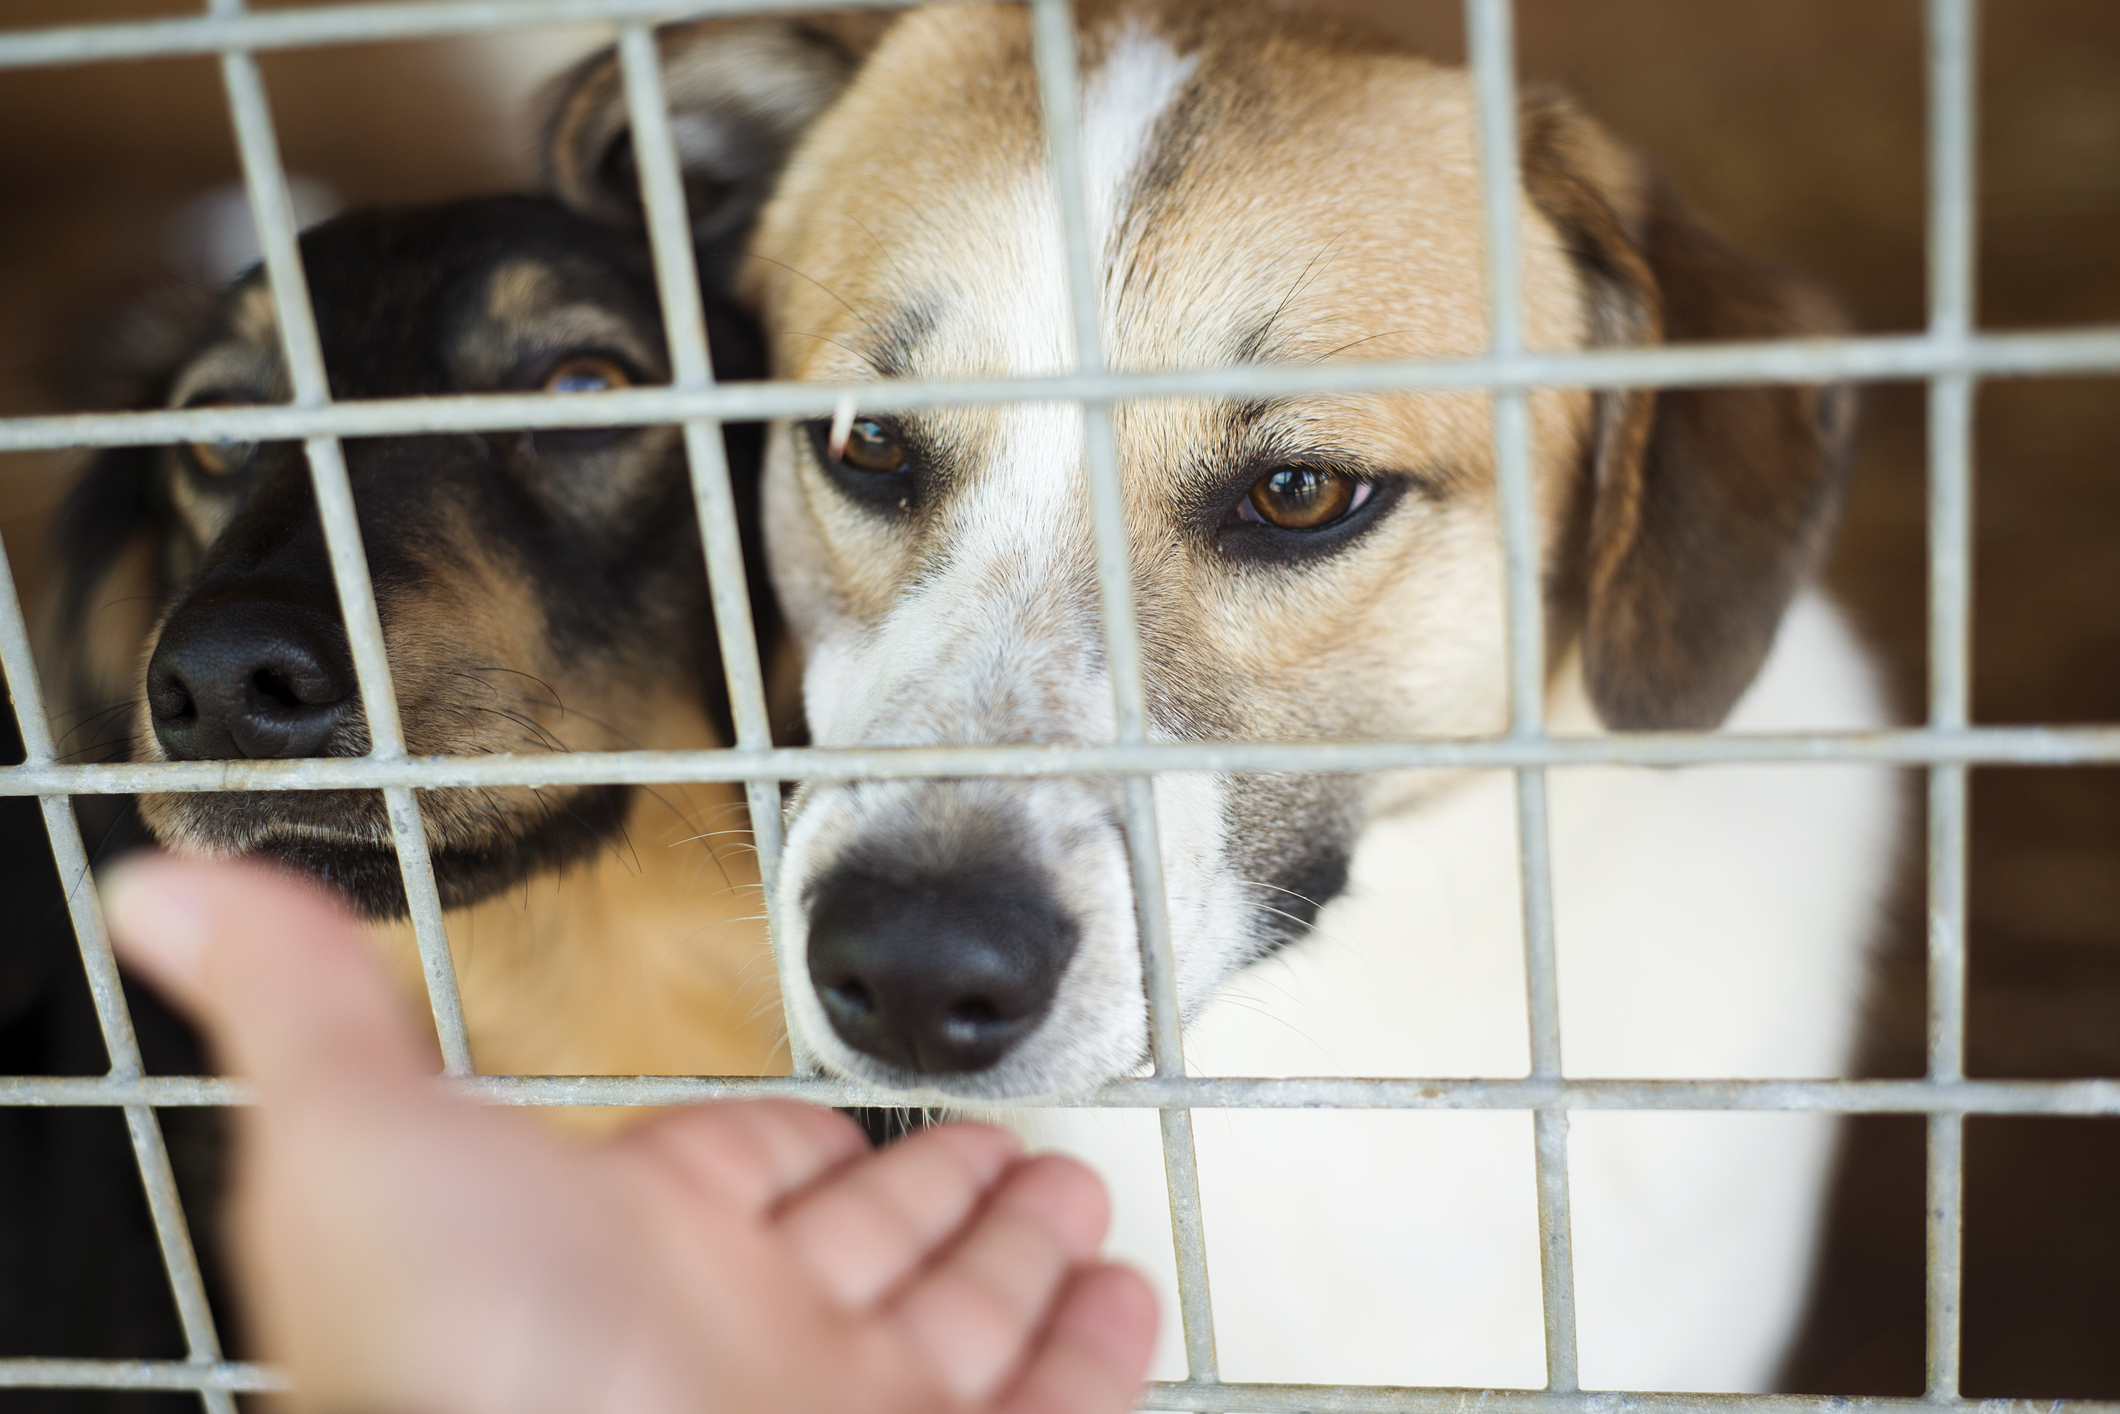 Local animal shelters, rescue agencies part of national